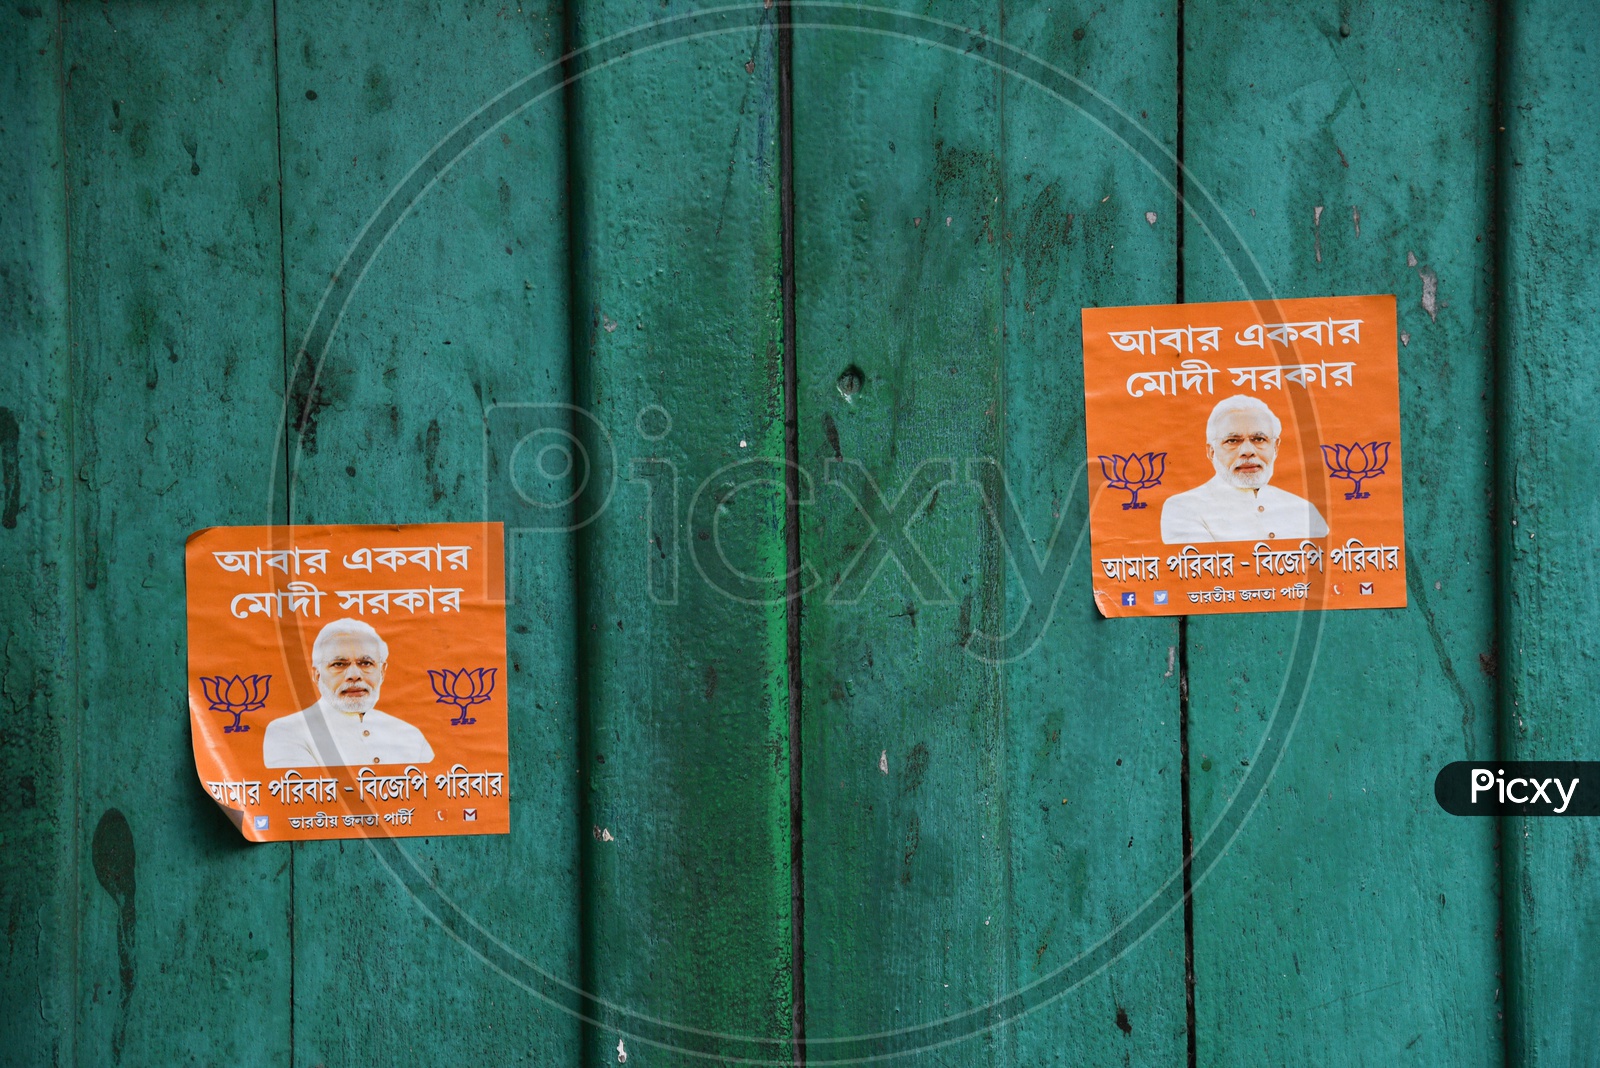 Narendra Modi Stickers On the Walls As a Part Of Election Campaign in  Kolkata